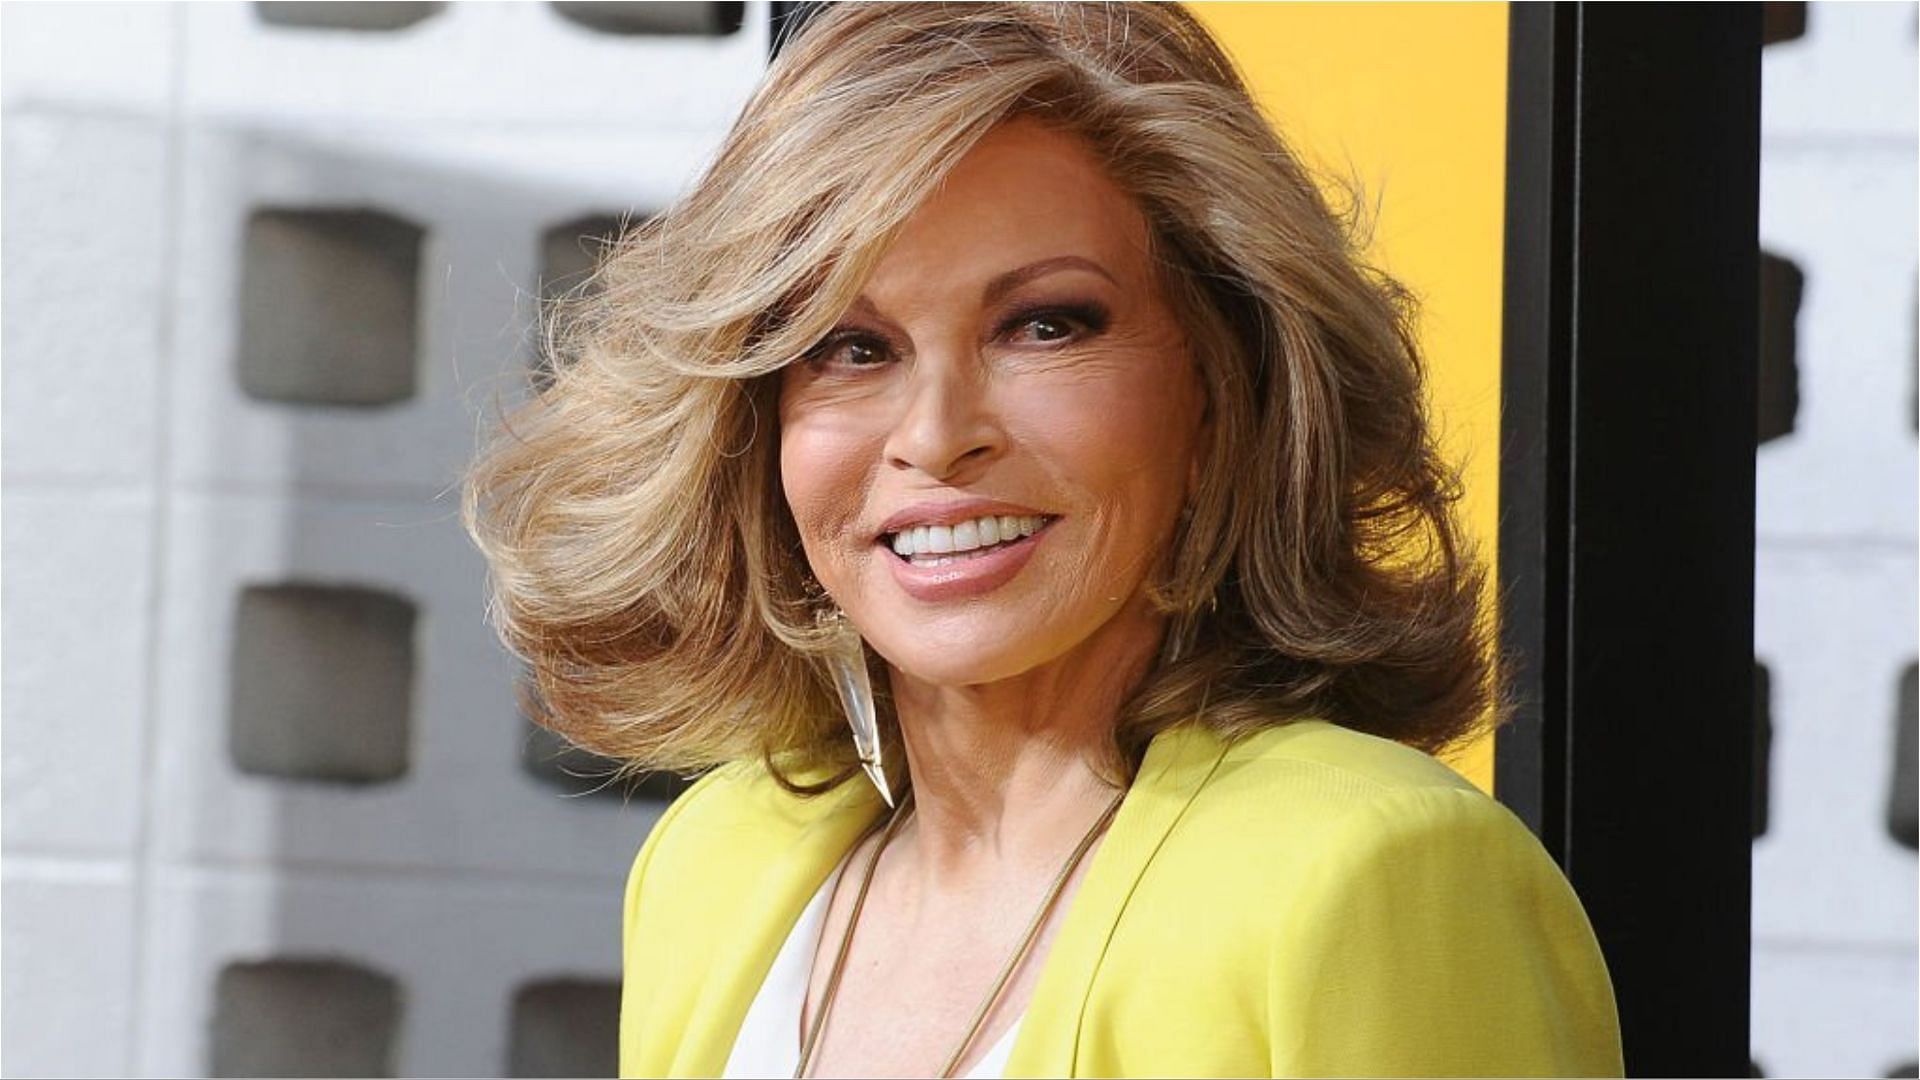 Raquel Welch appeared in One Million Years B.C. (Image via Jason LaVeris/Getty Images)